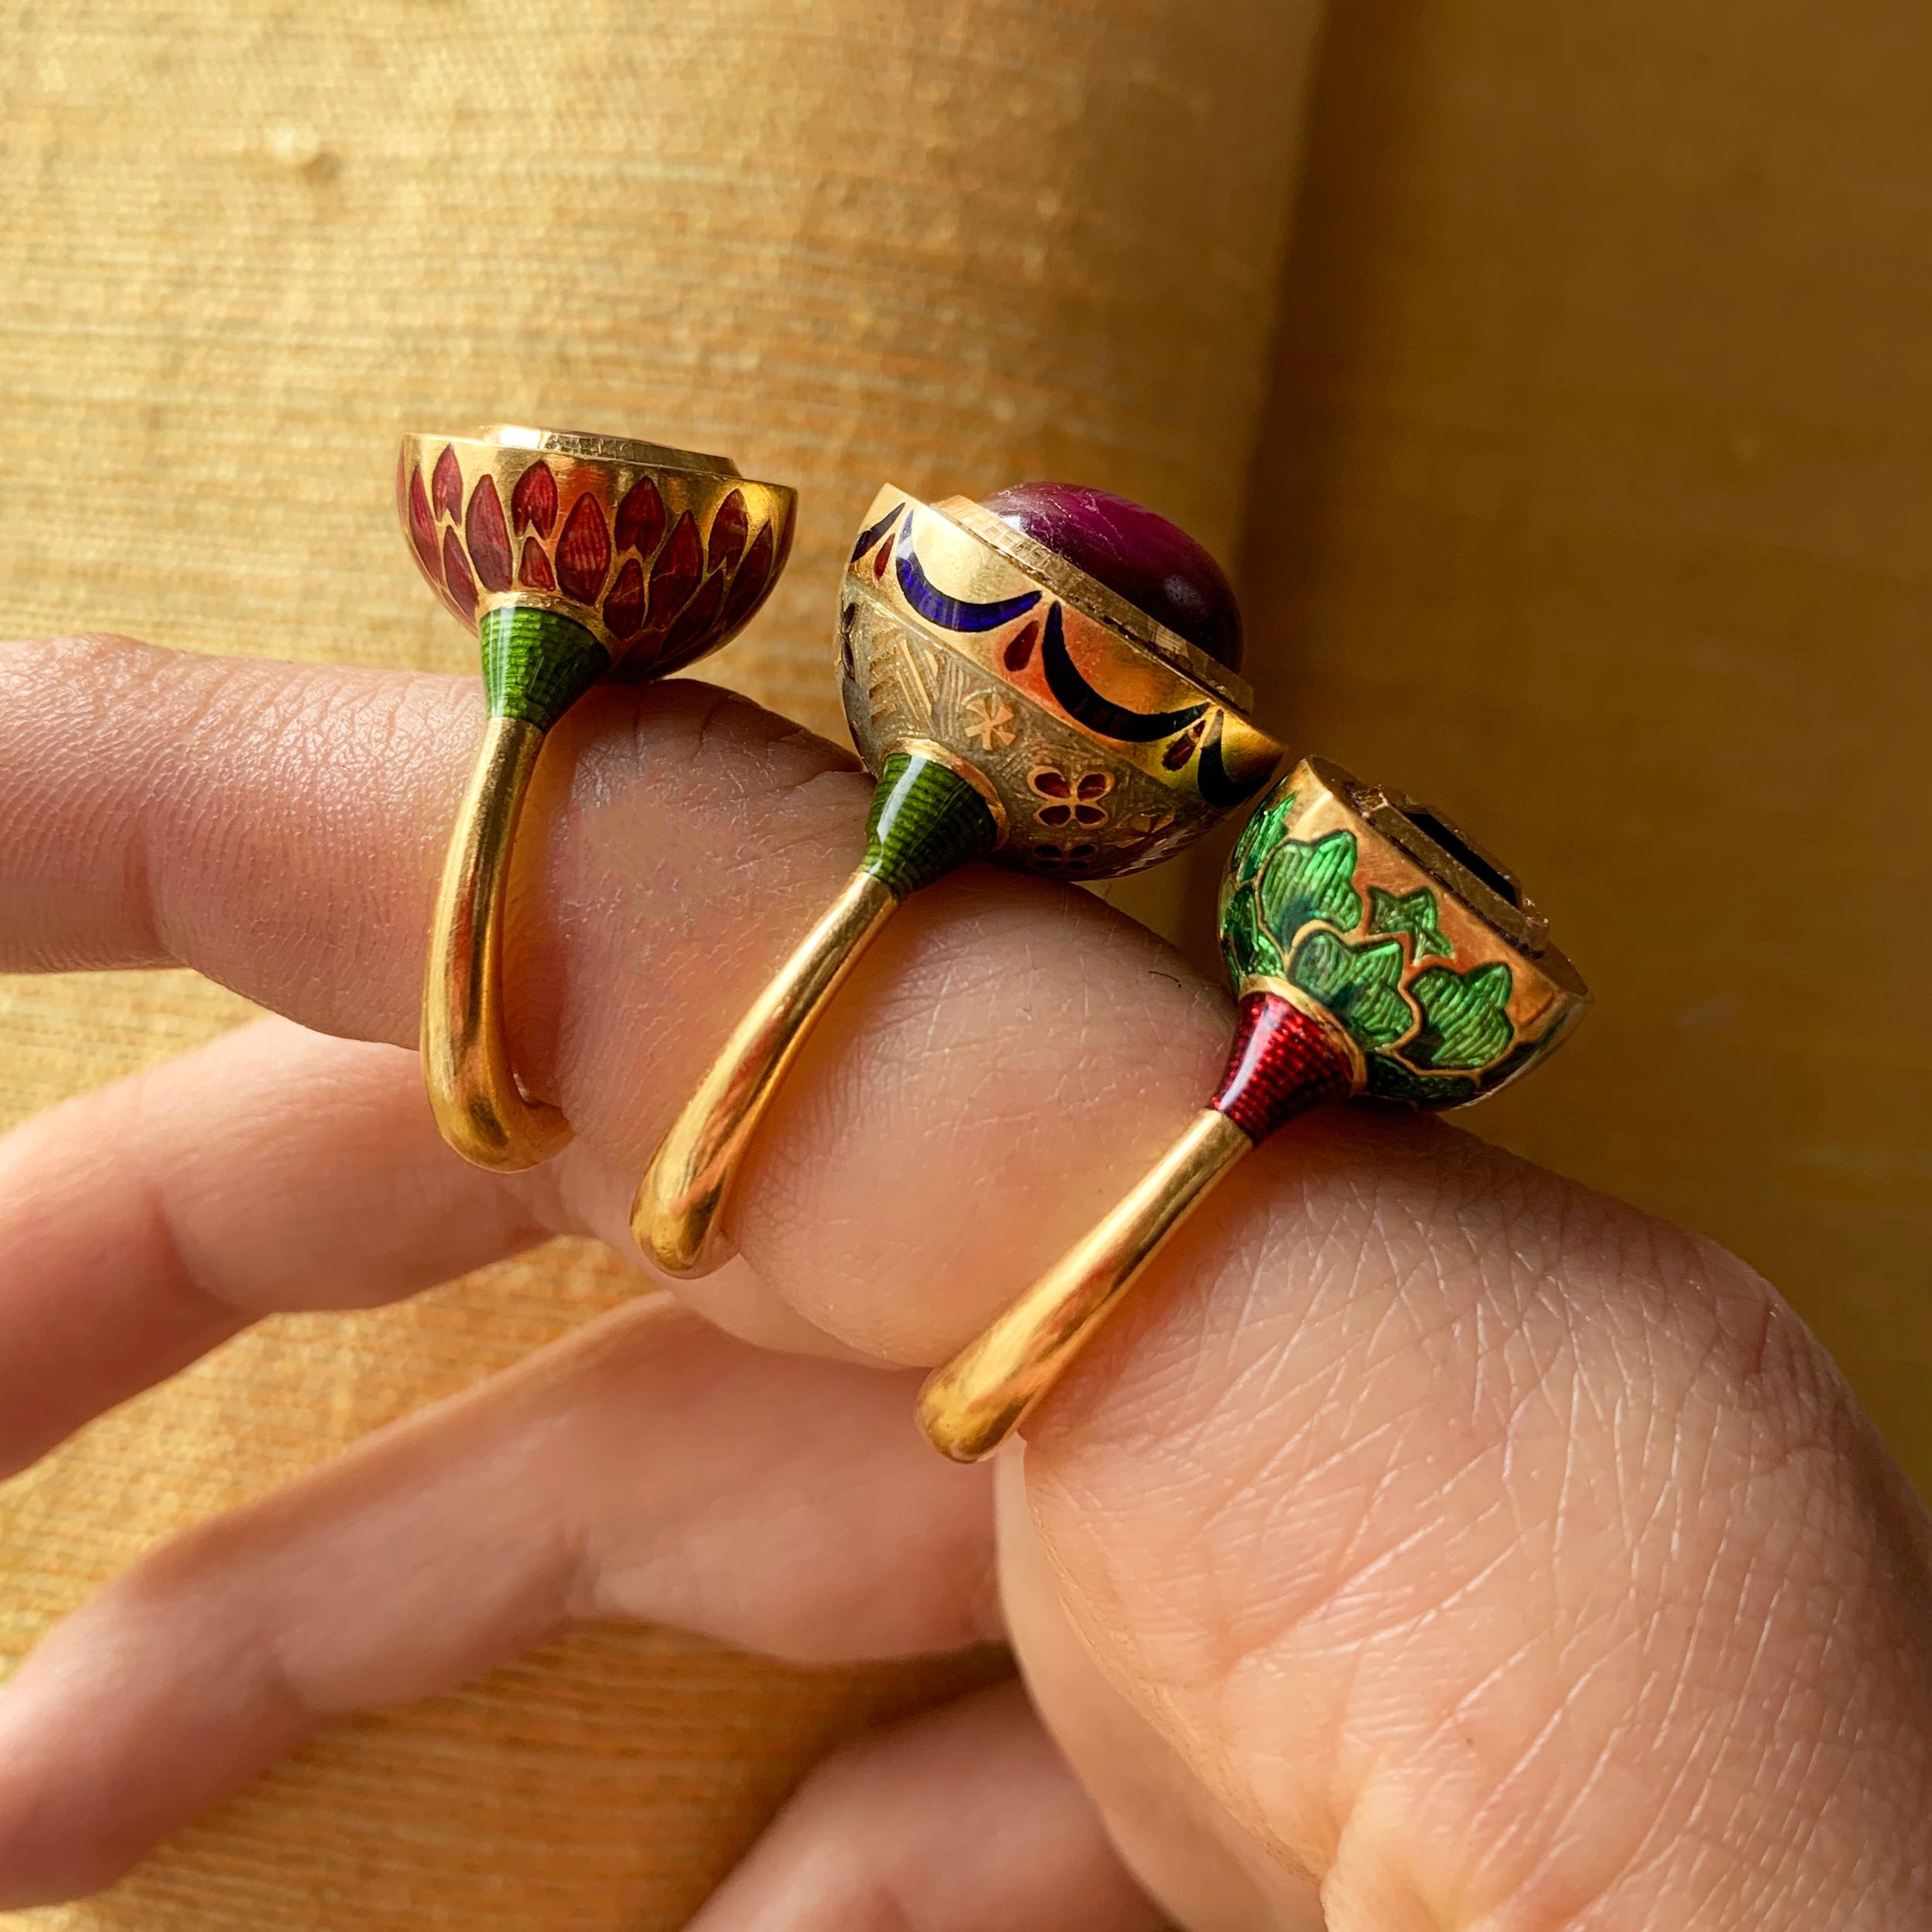 A bi-colored blue/green tourmaline, vitreous enamel, and 22 karat gold Jodhpur Miniature Leaf ring, by Alice Cicolini, 2017.

Ring size 6 1/4. This ring can be sized. 